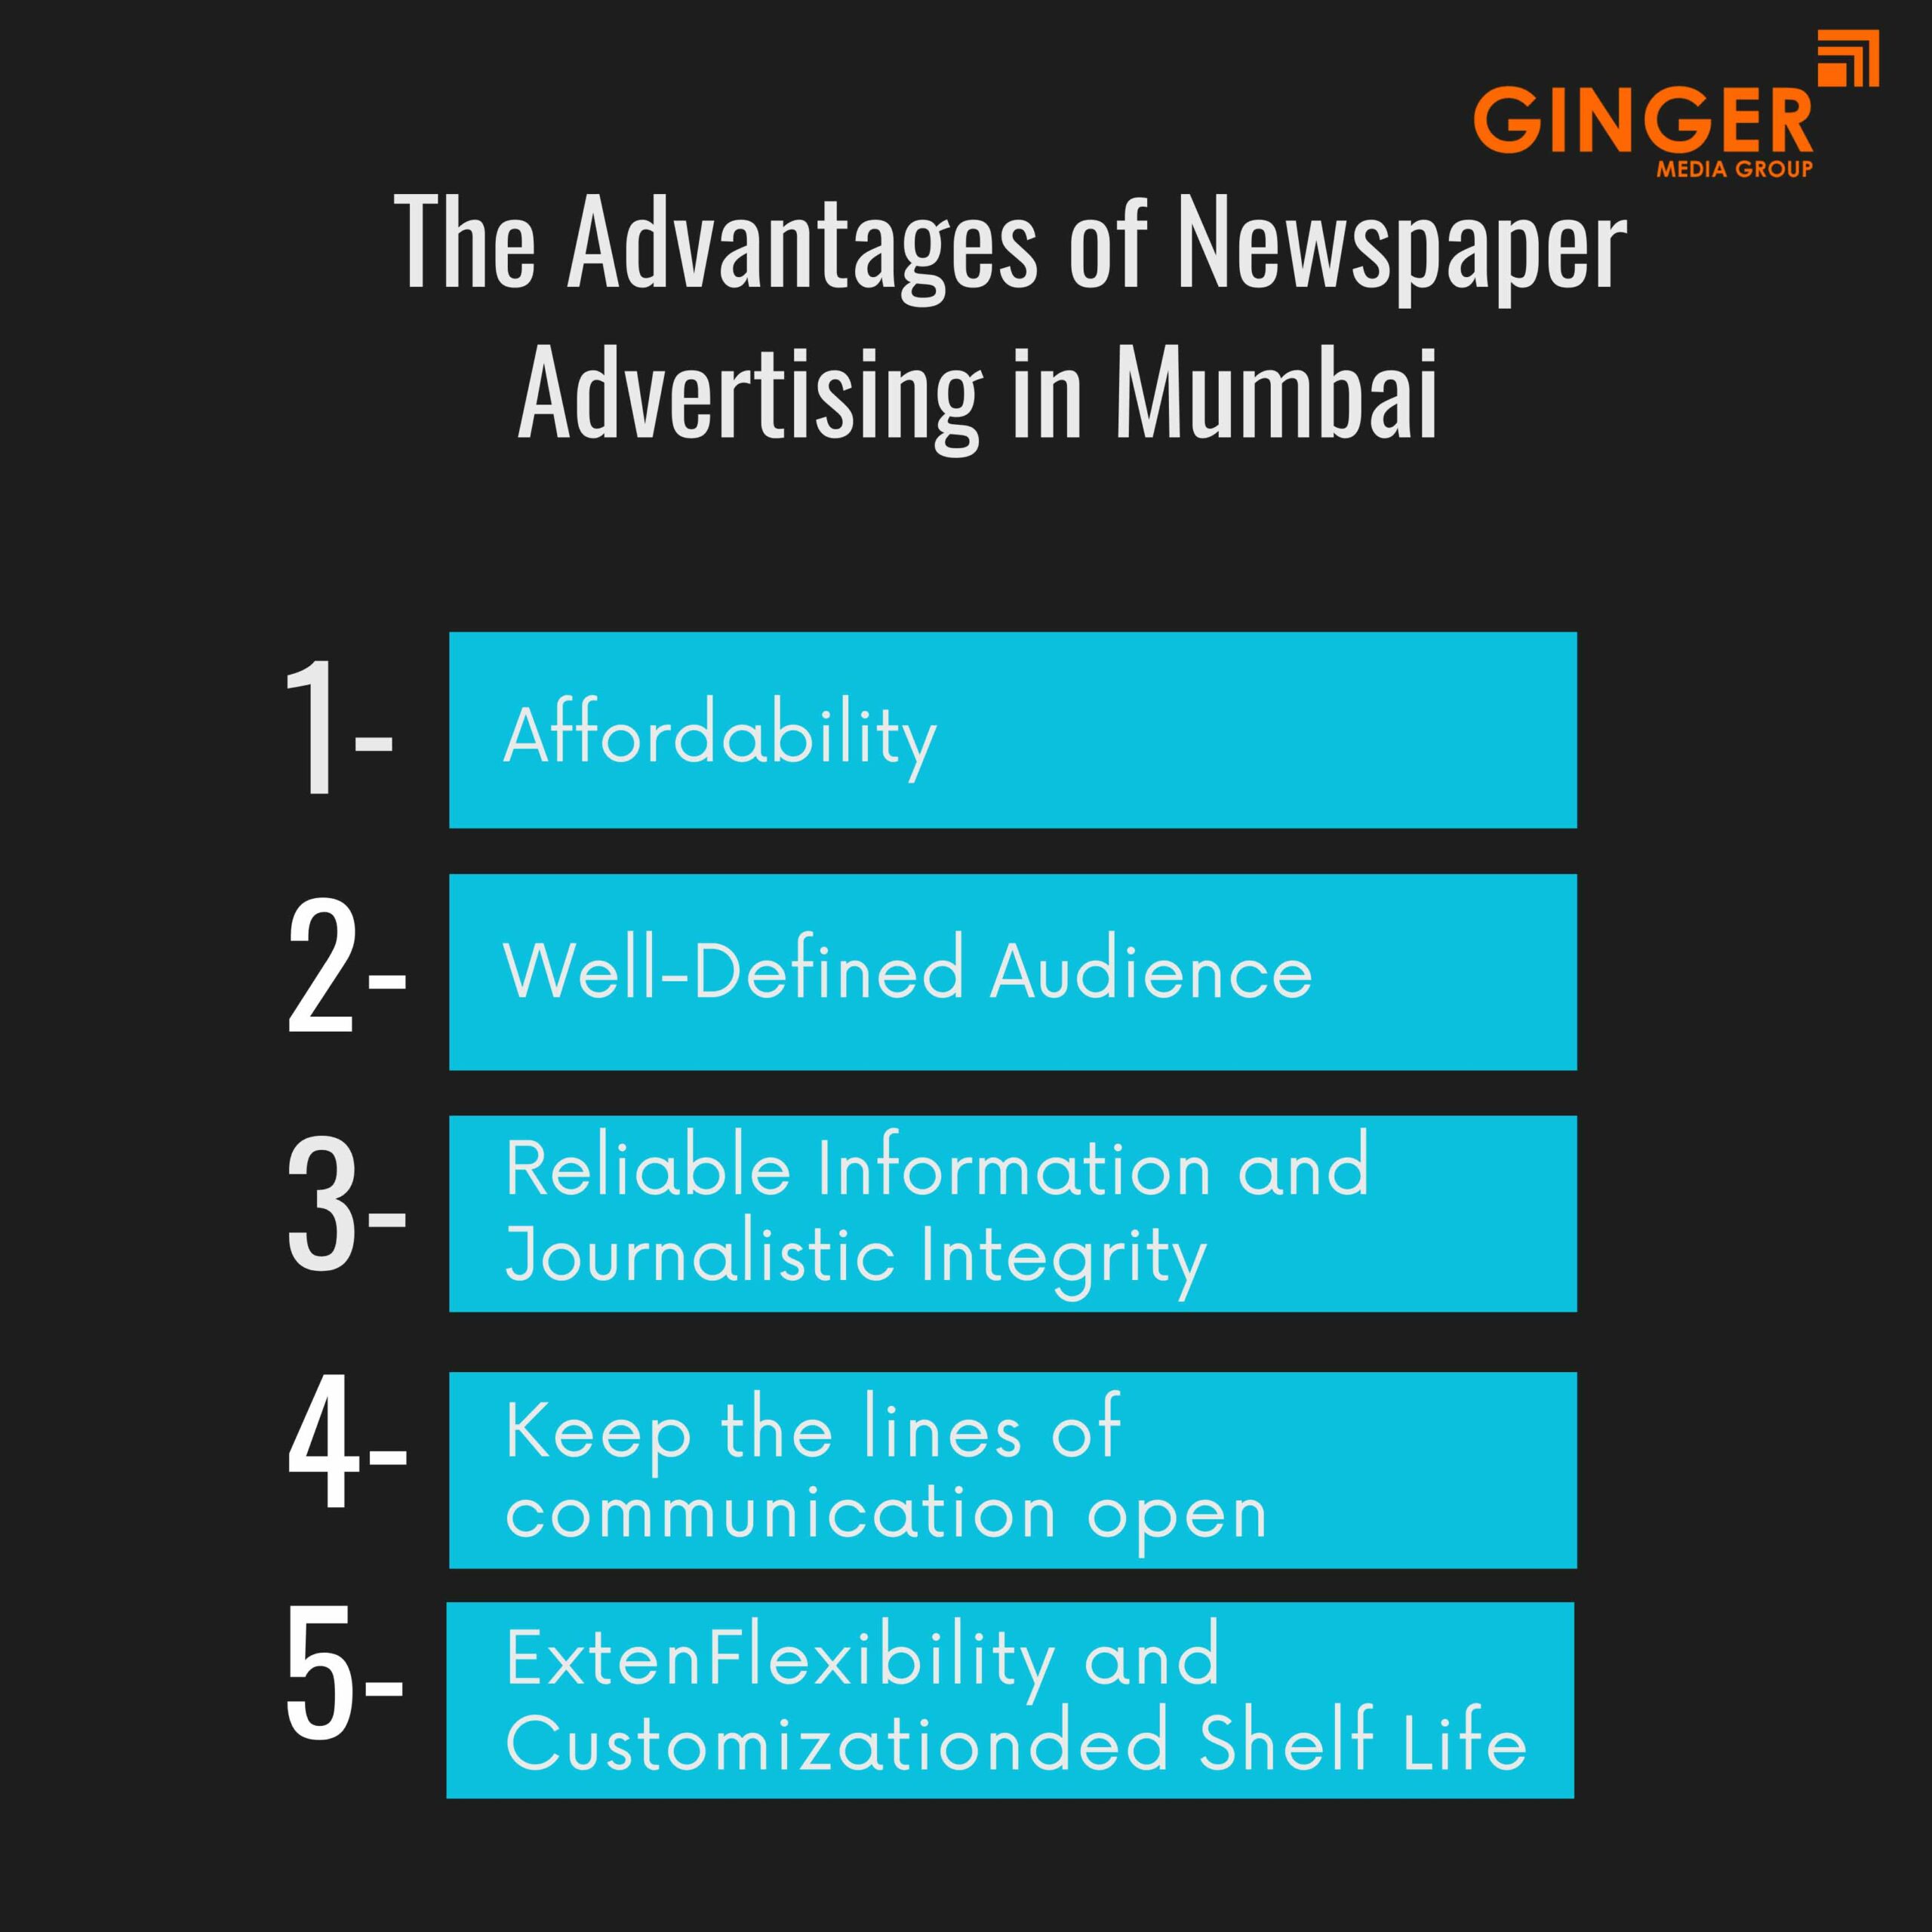 the advantages of newspaper advertising in mumbai